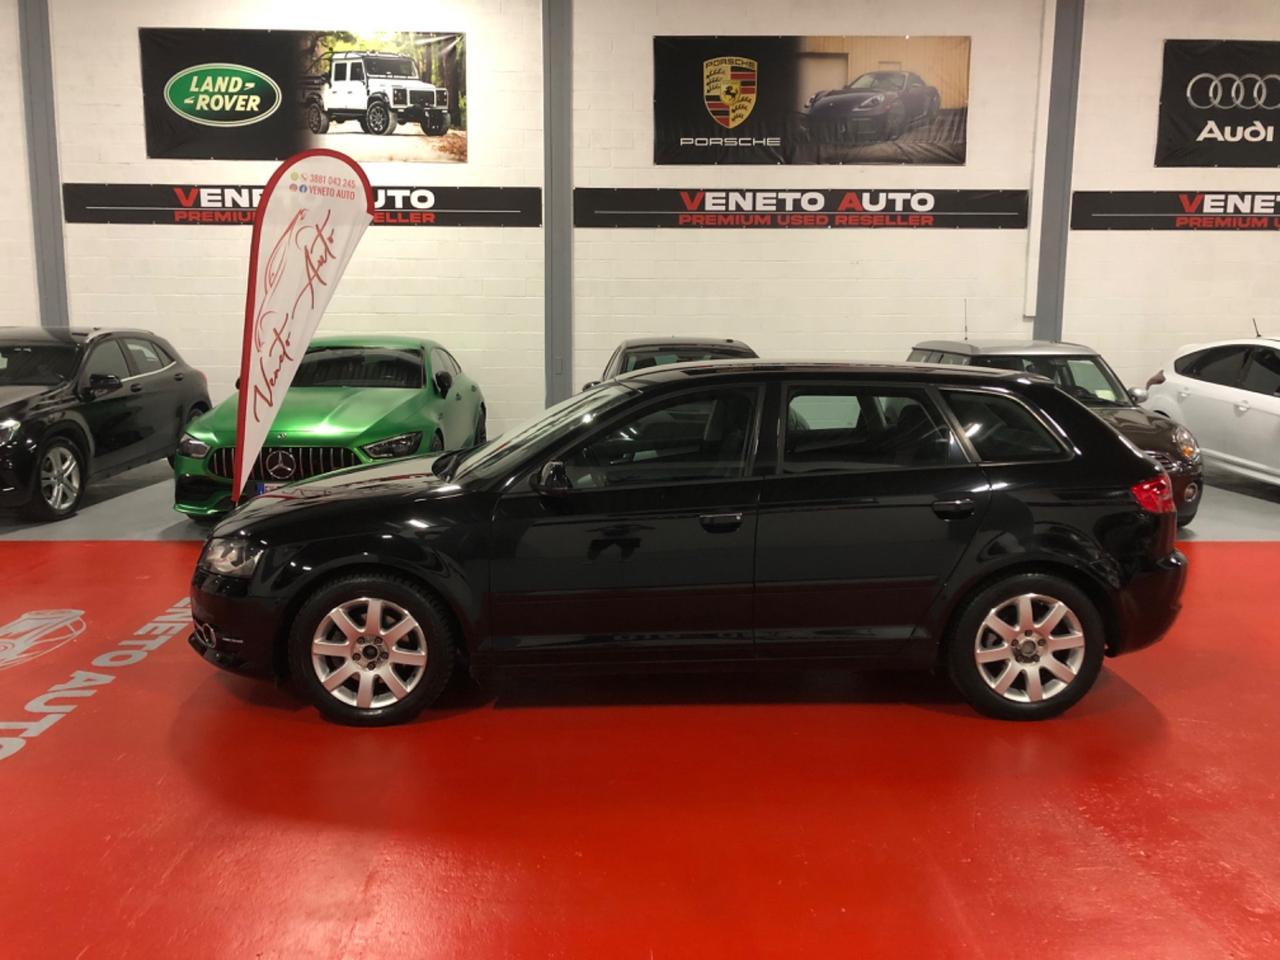 Audi A3 2.0 TDI S tronic Attraction